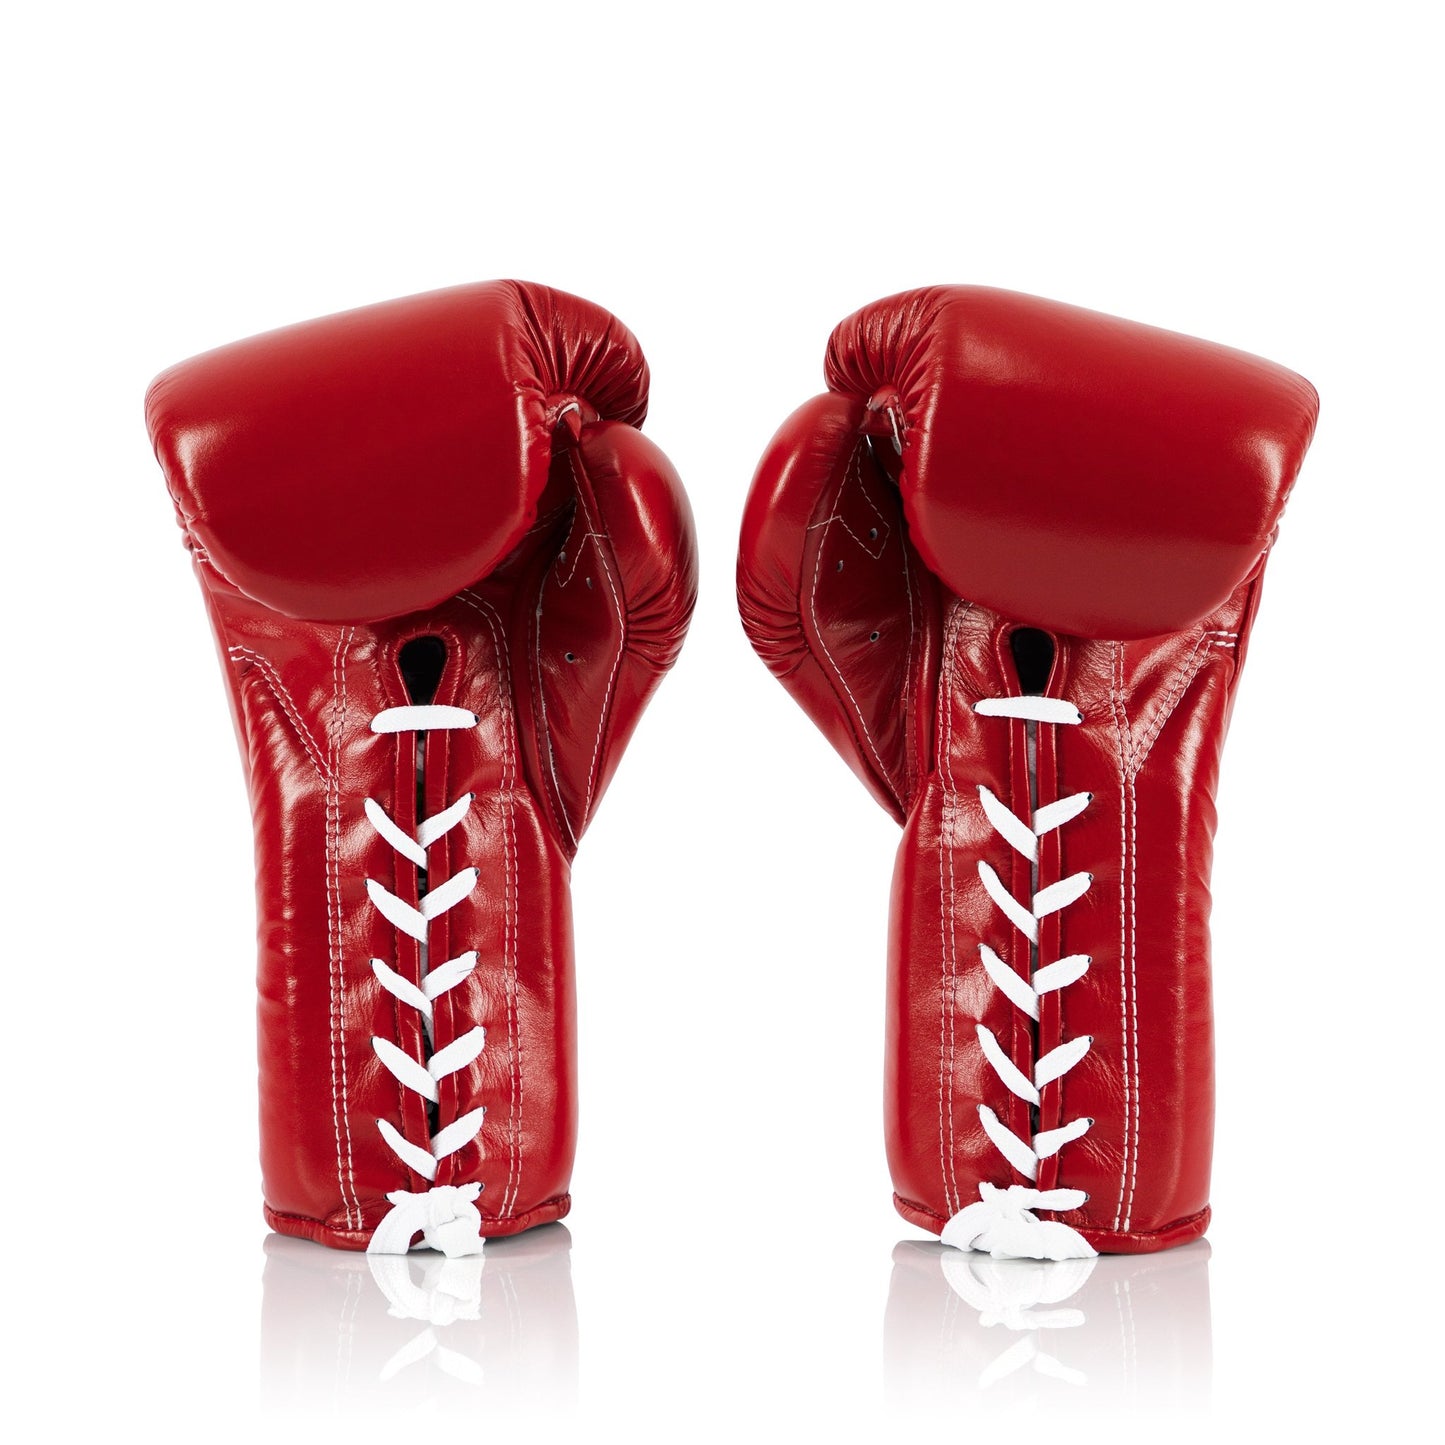 Fairtex Pro BGL 7 Red Lace-Up Boxing Gloves